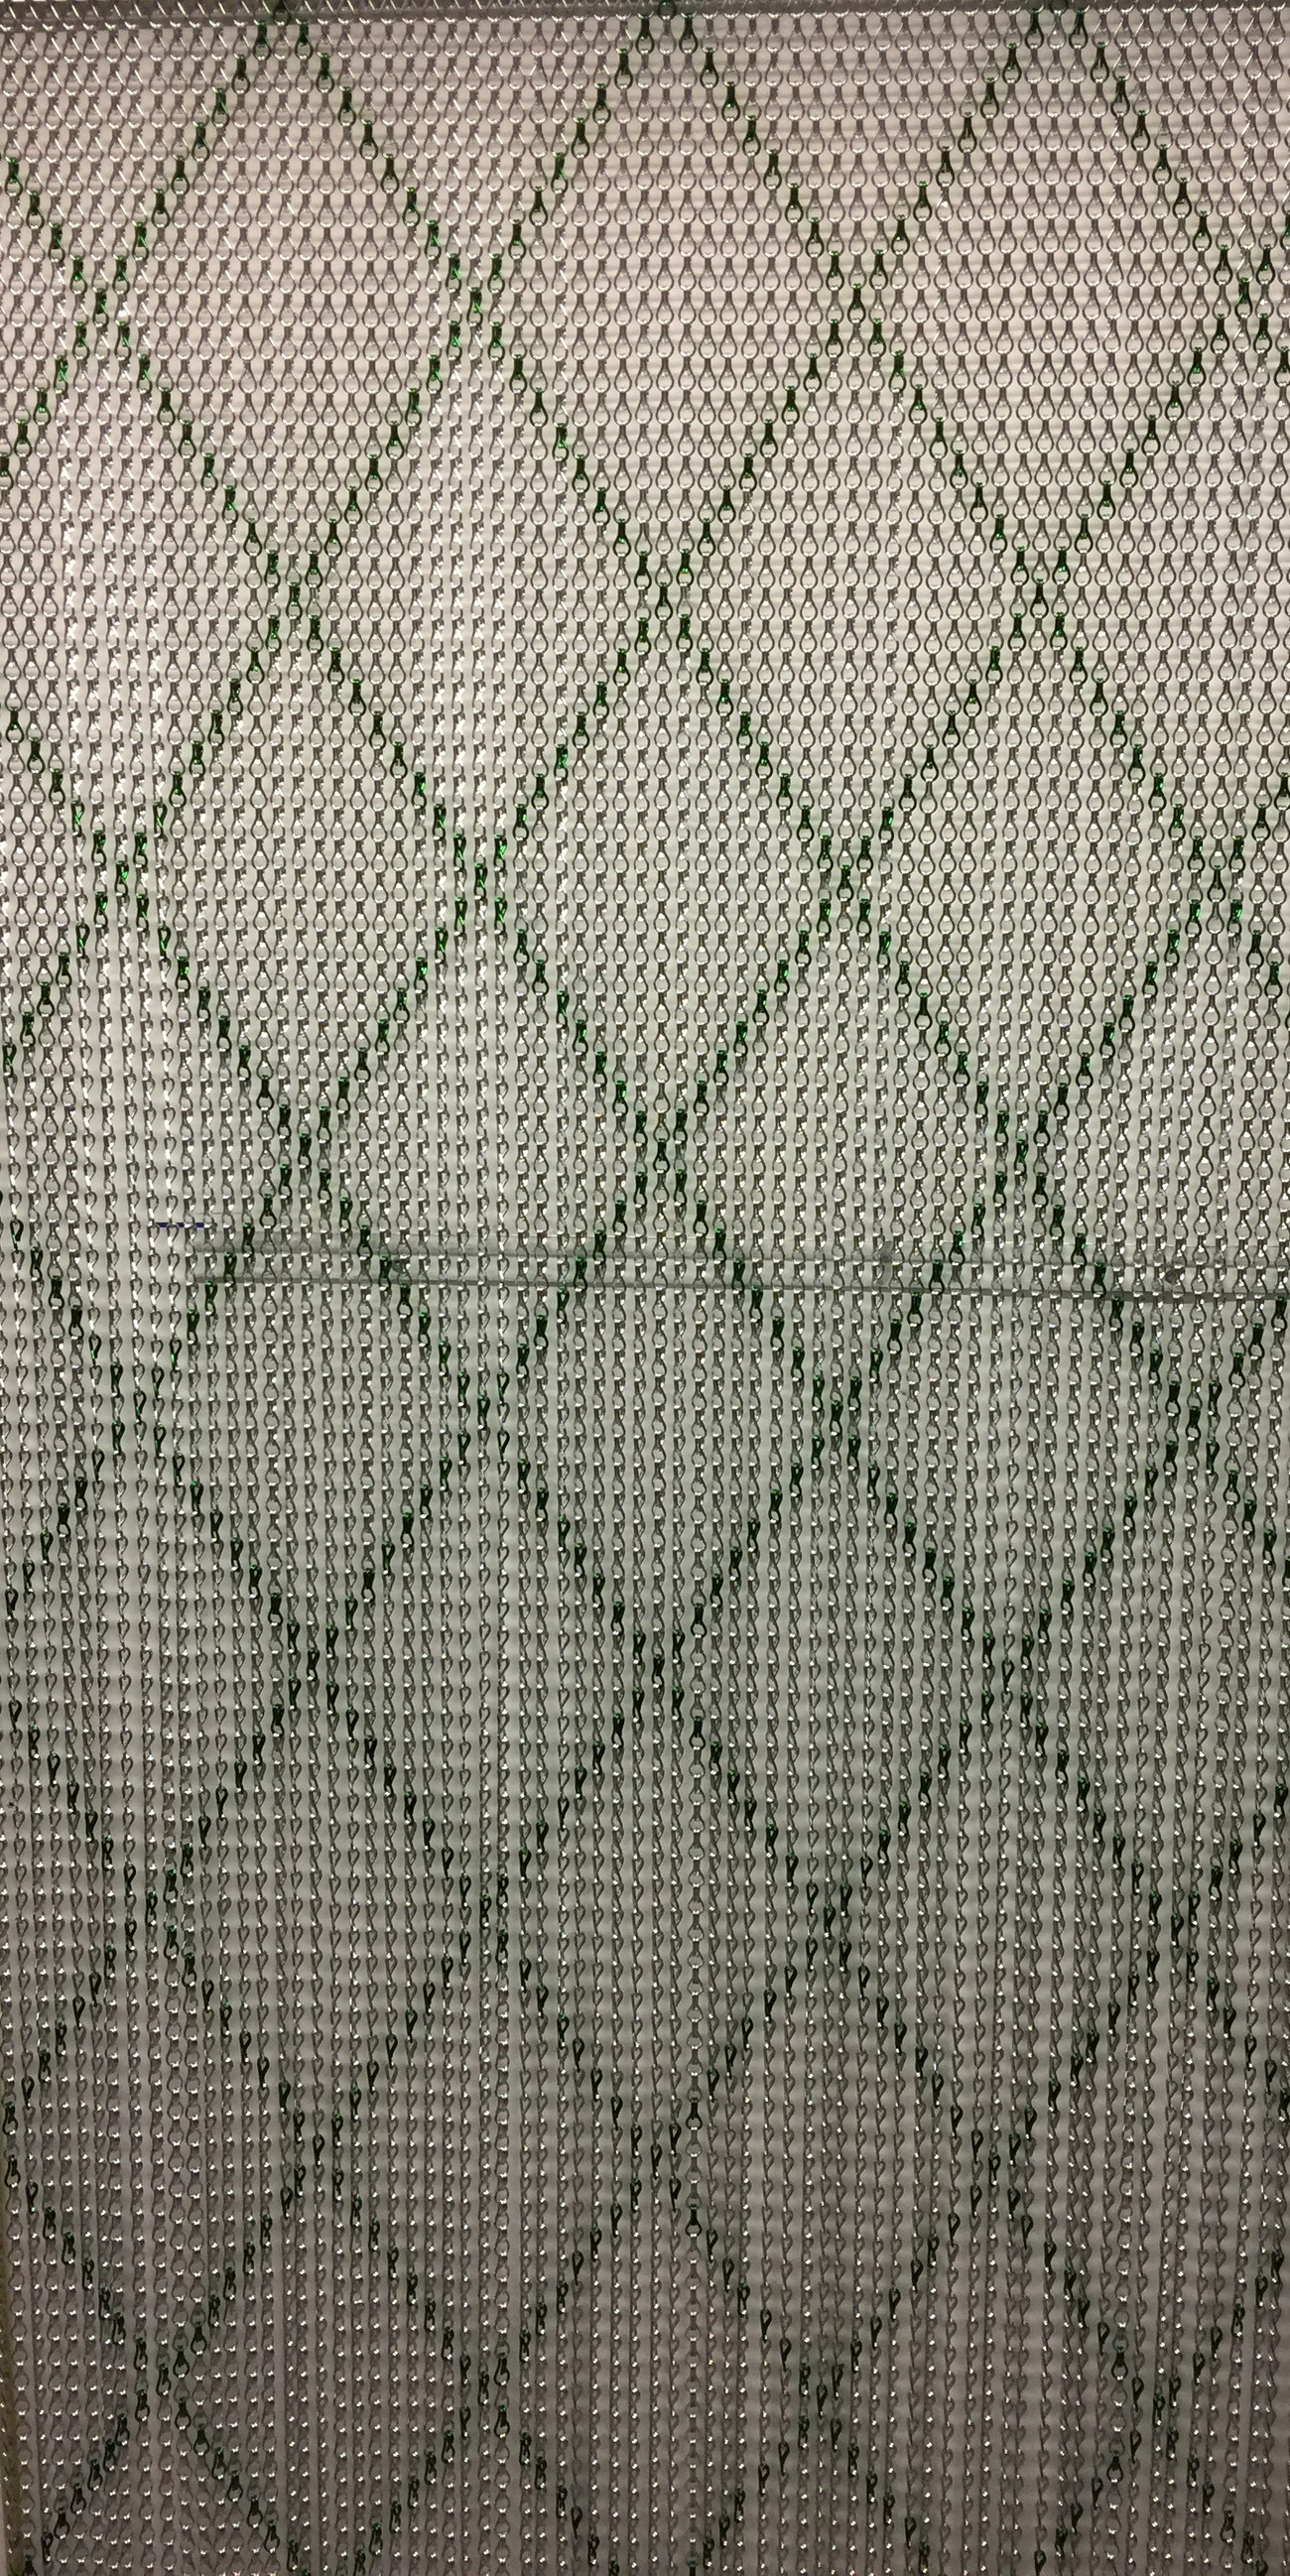 Diamond connecting pattern for a decorative piece. Forest Green and Silver have been used to create this diamond pattern.